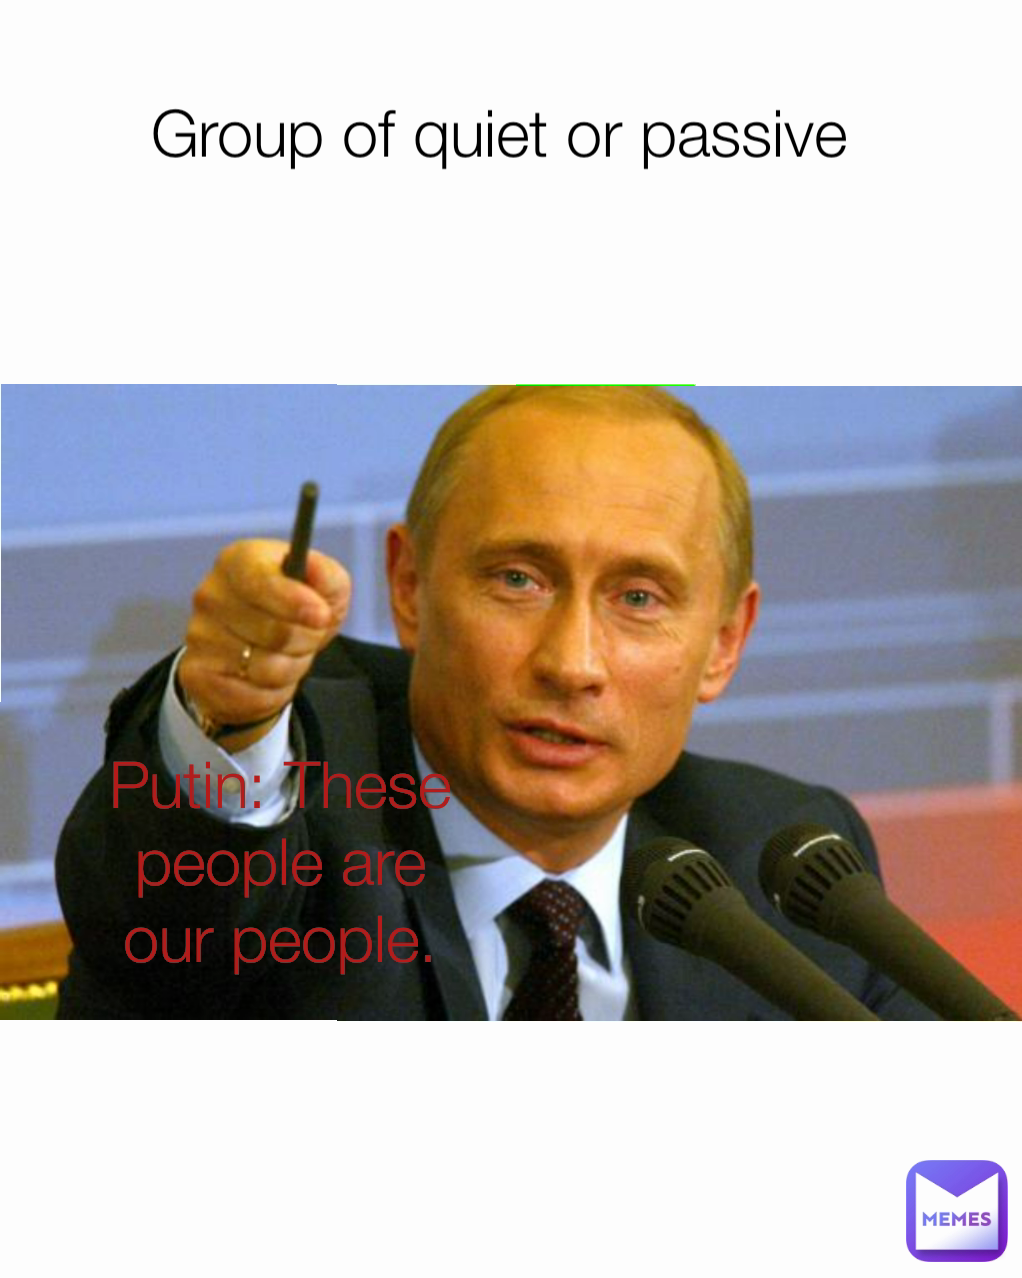 Group of quiet or passive  Putin: These people are our people.